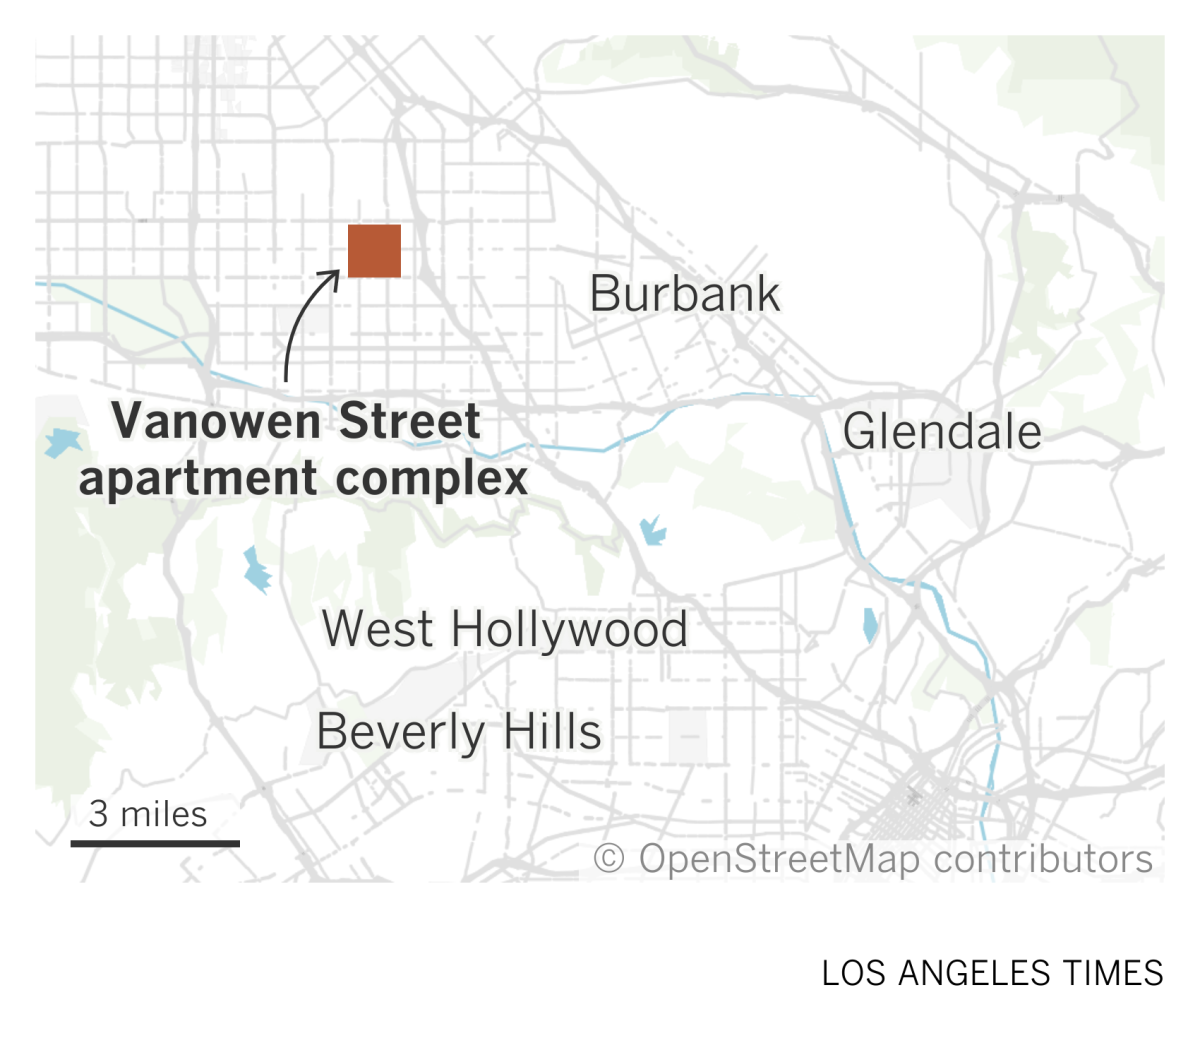 Map shows the location of an apartment complex on Vanowen Street in North Hollywood.